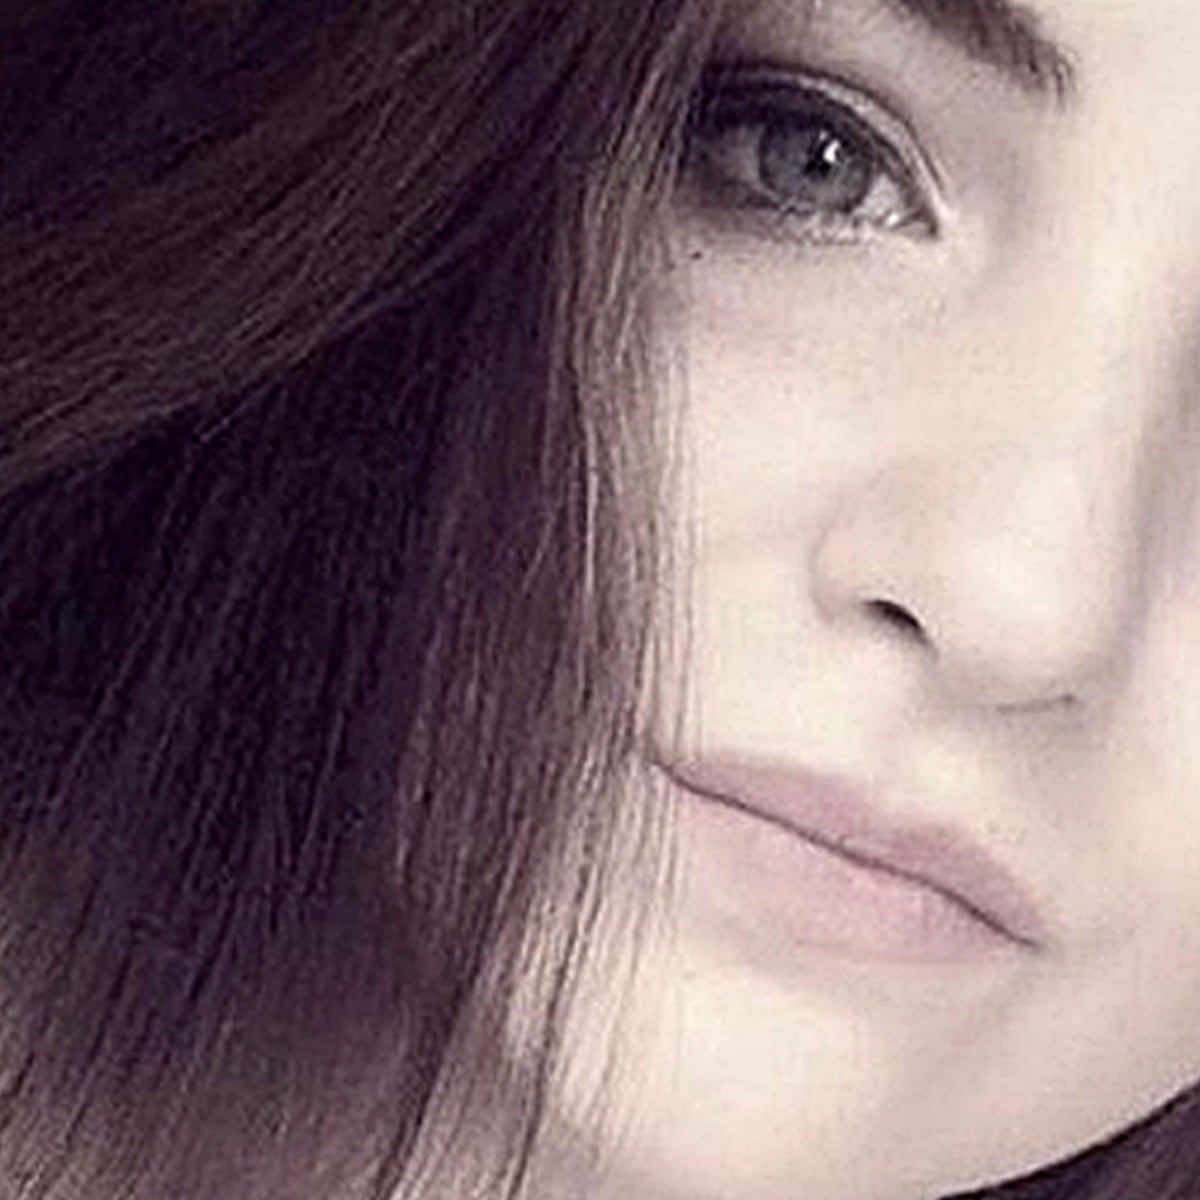 Nude snapchat leak drove teen girl to suicide